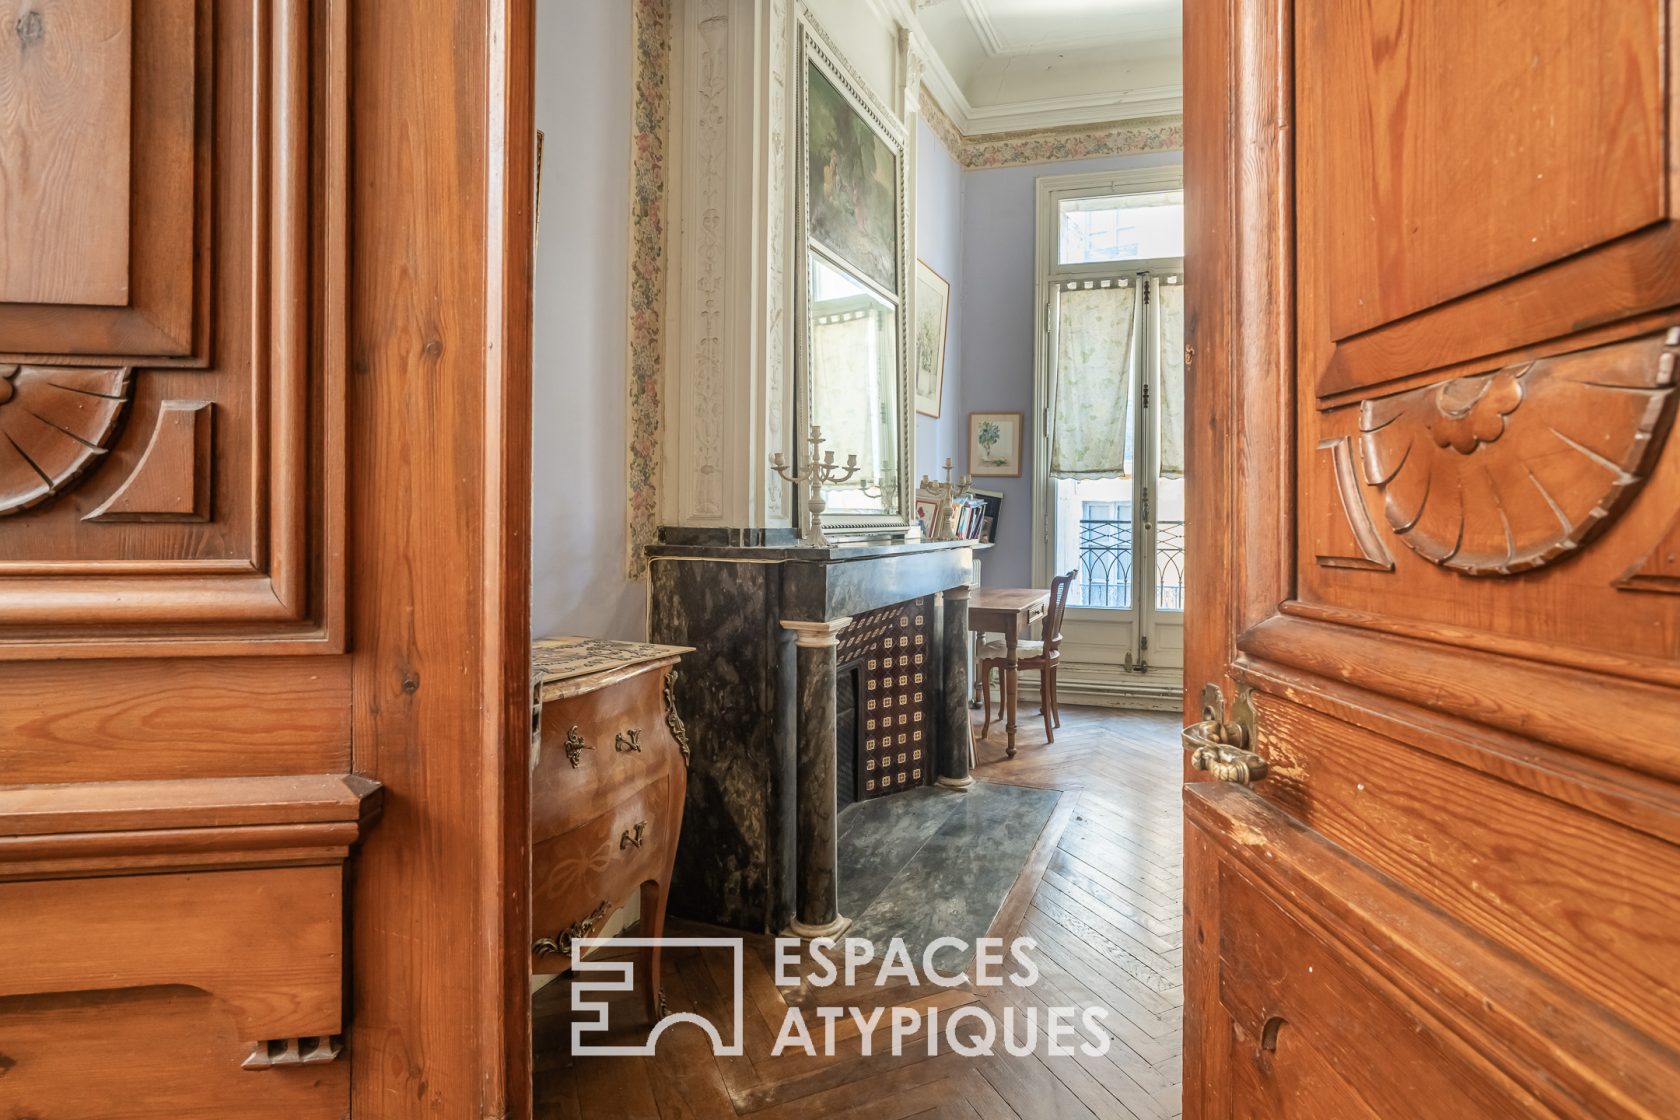 Building in the heart of the remarkable heritage of Narbonne